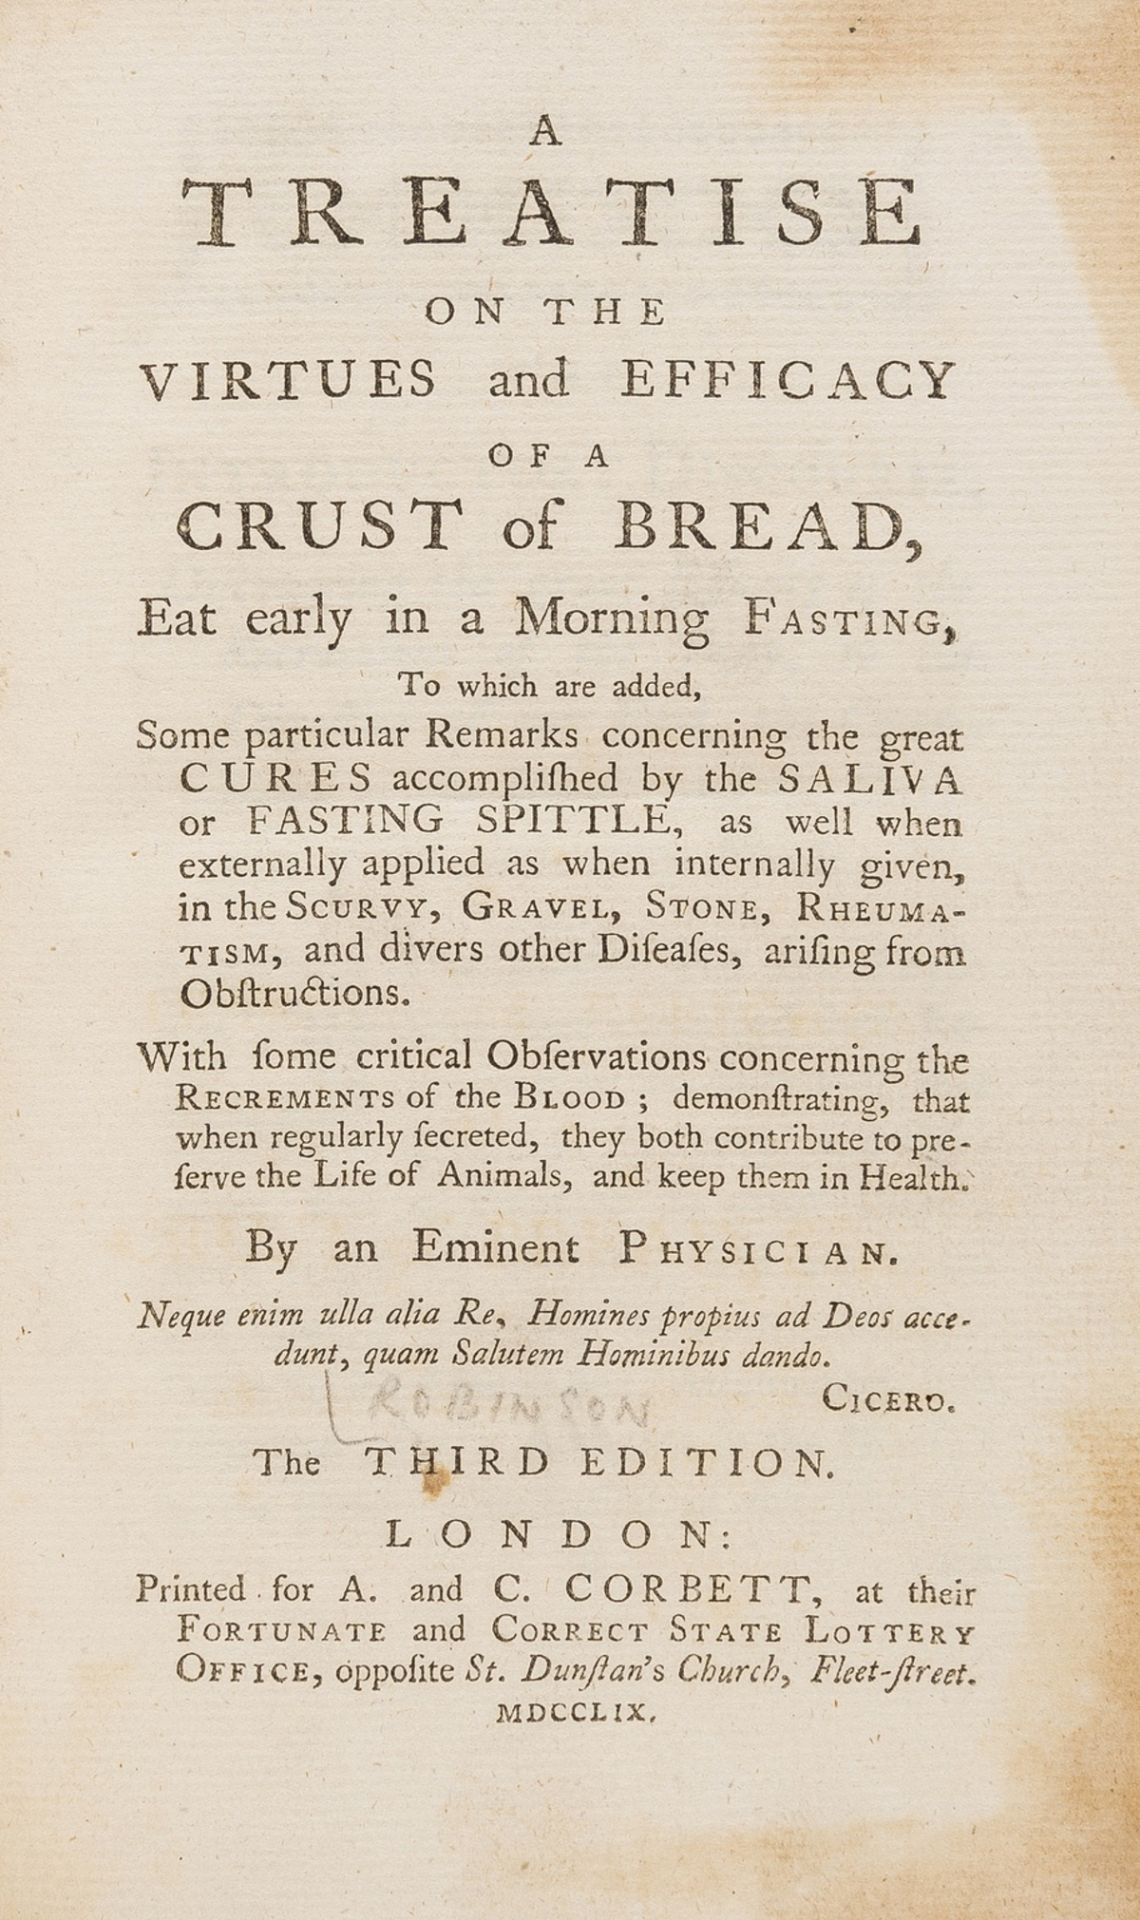 Diet.- [Robinson (Nicholas)] A Treatise on the Virtues and Efficacy of a Crust of Bread, Eat early …